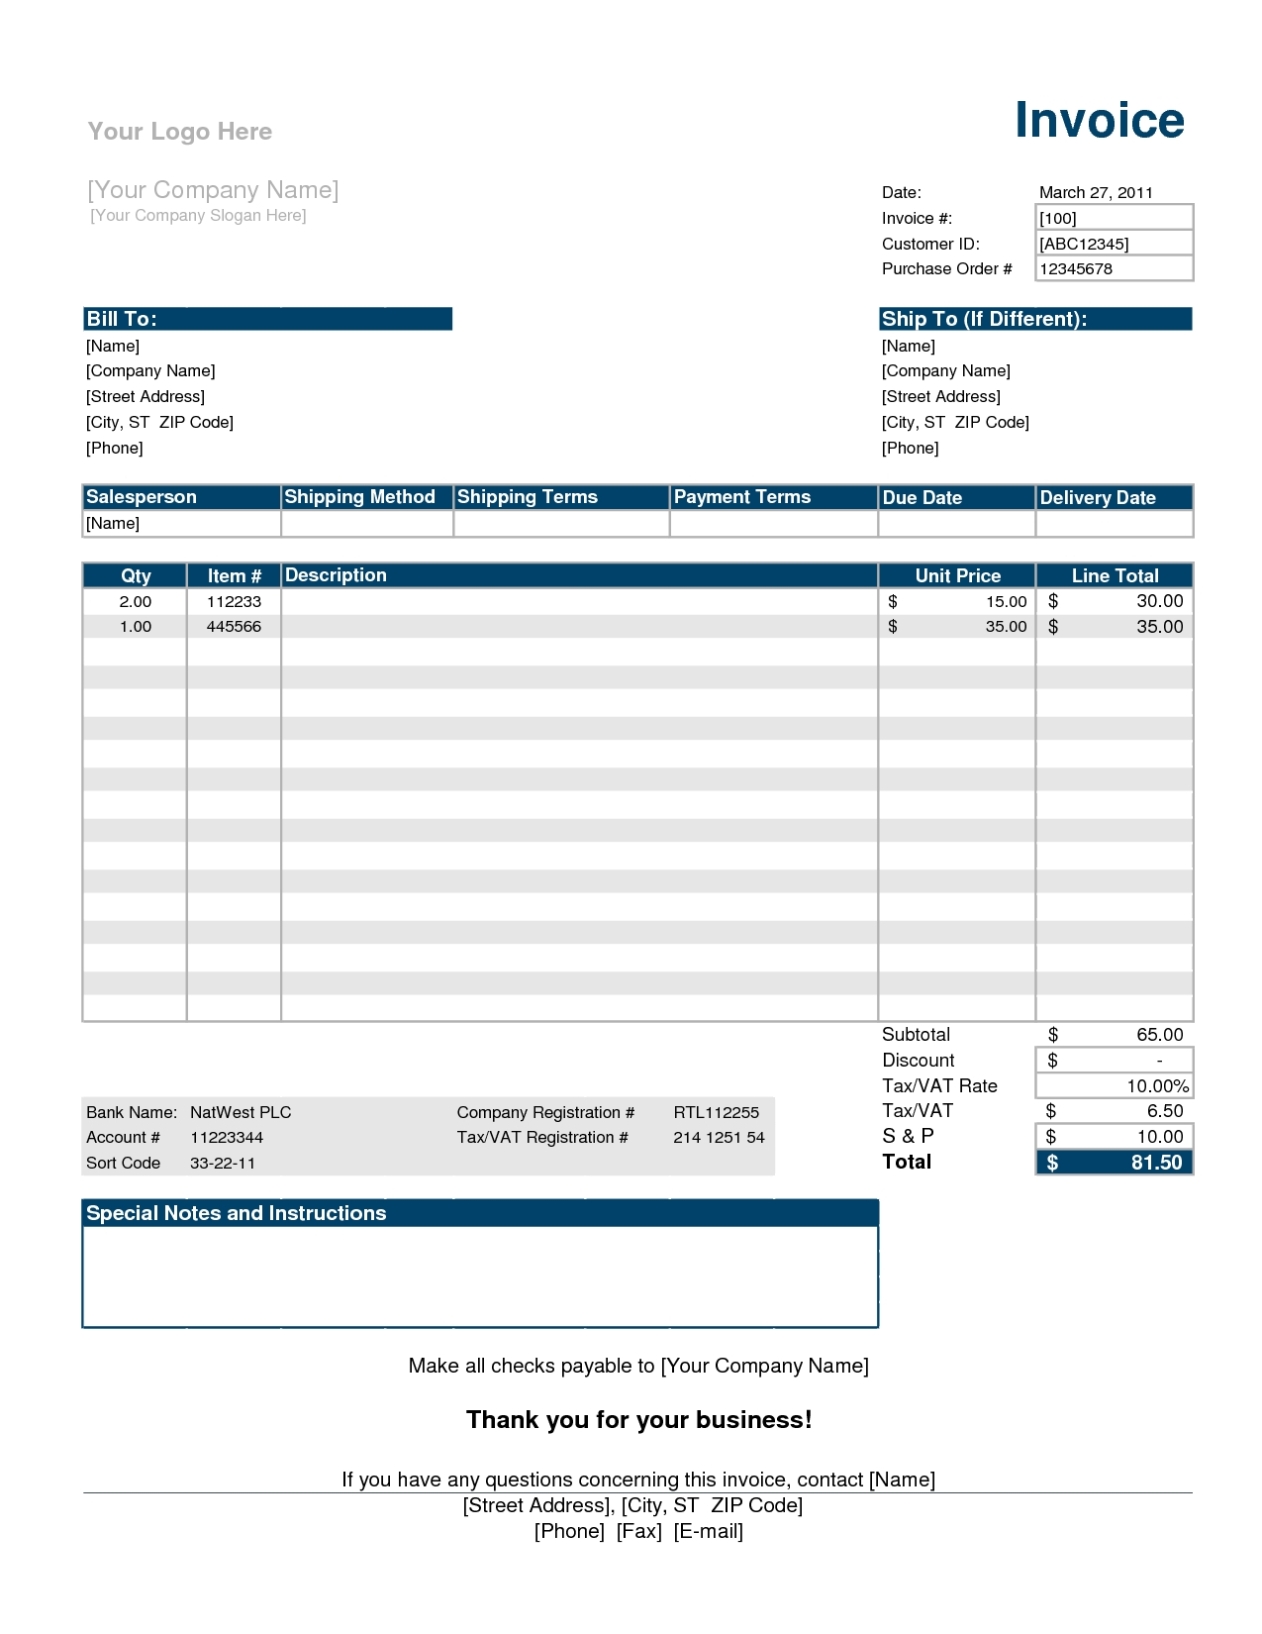 Malaysia Gst Tax Invoice Template Excel : Tax Invoice Format Malaysia : Simply Enter Few Points Inside Interest Invoice Template